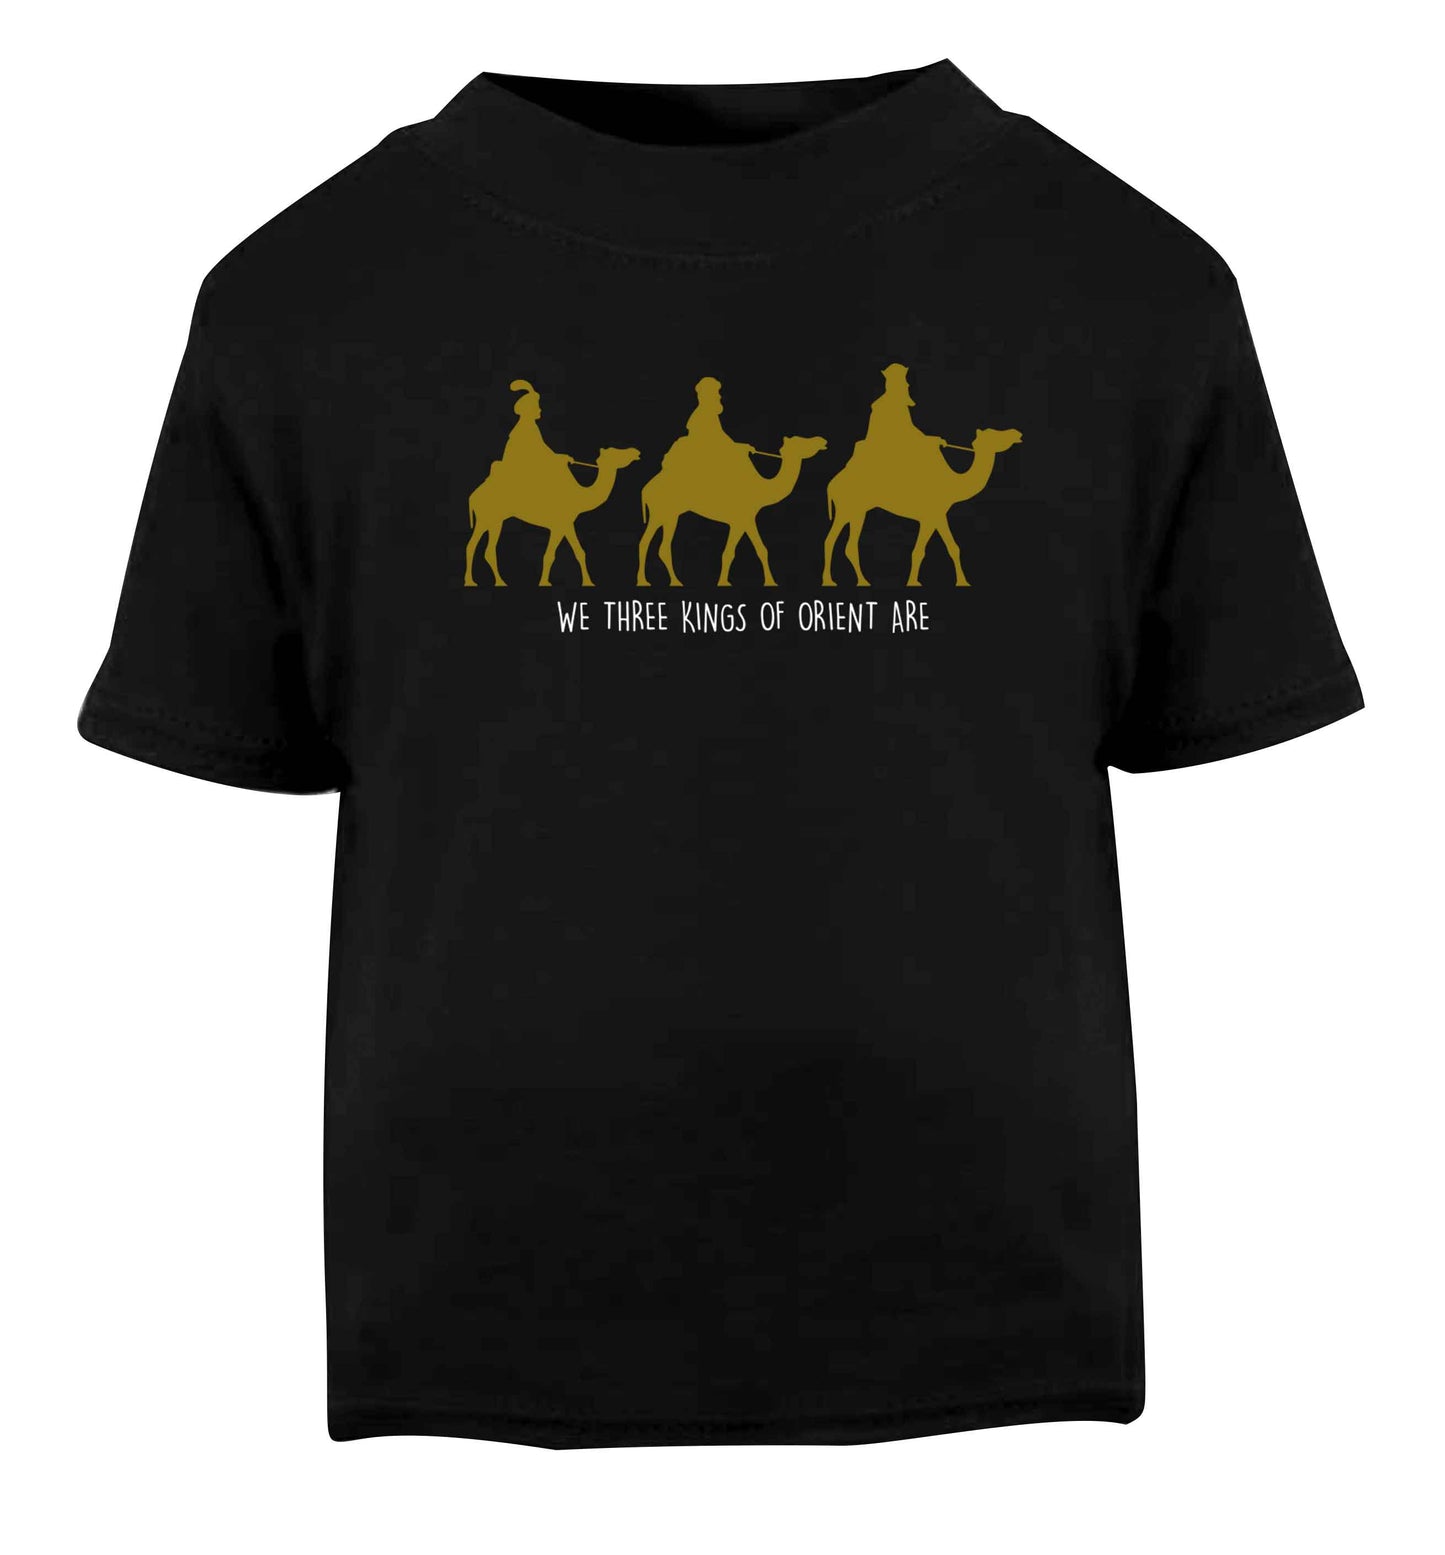 We three kings of orient are Black baby toddler Tshirt 2 years